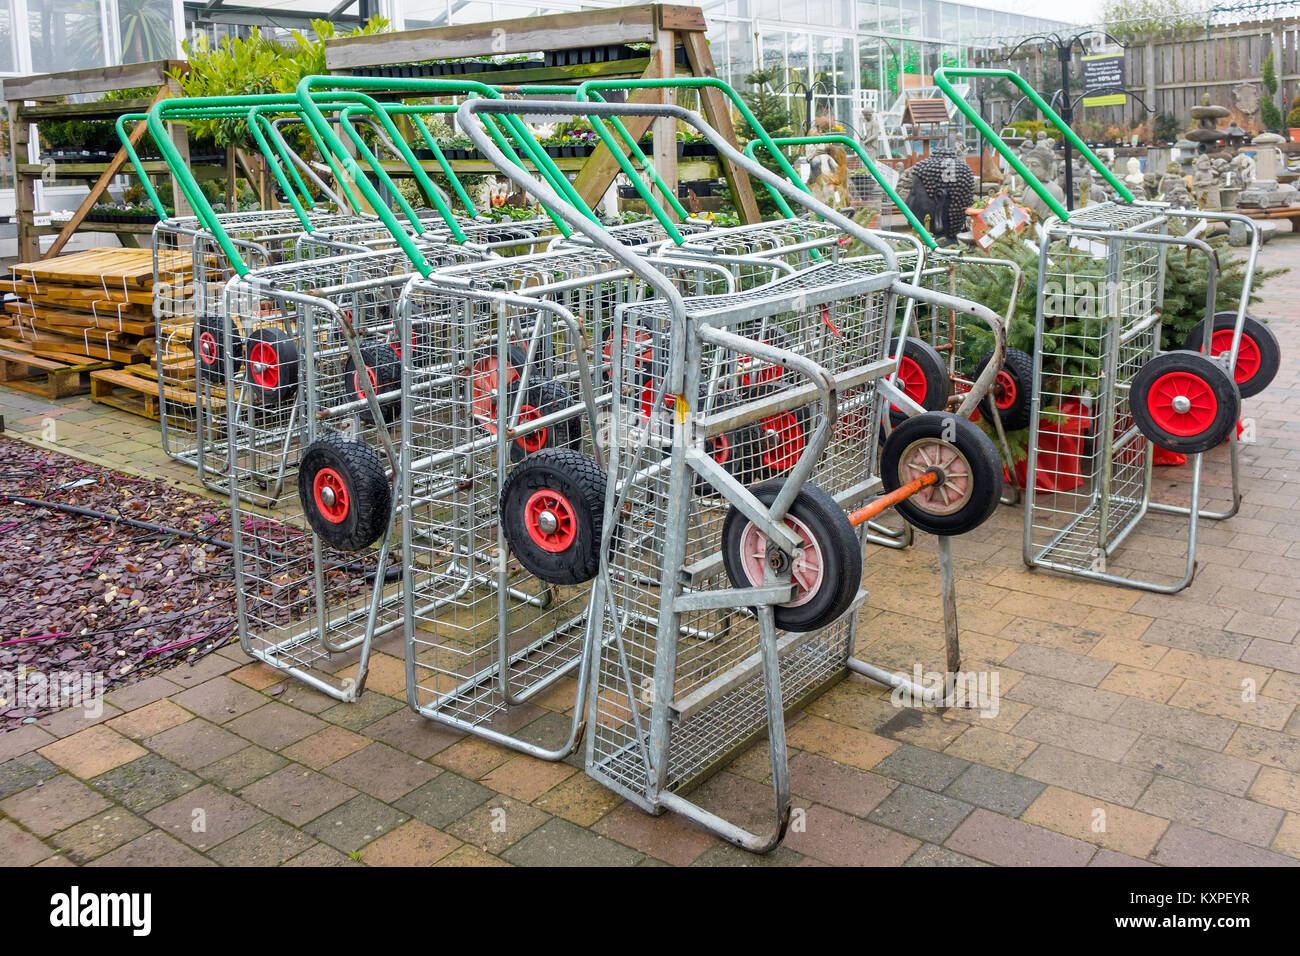 Heavy duty trolleys in a garden centre for moving large and heavy goods Stock Photo